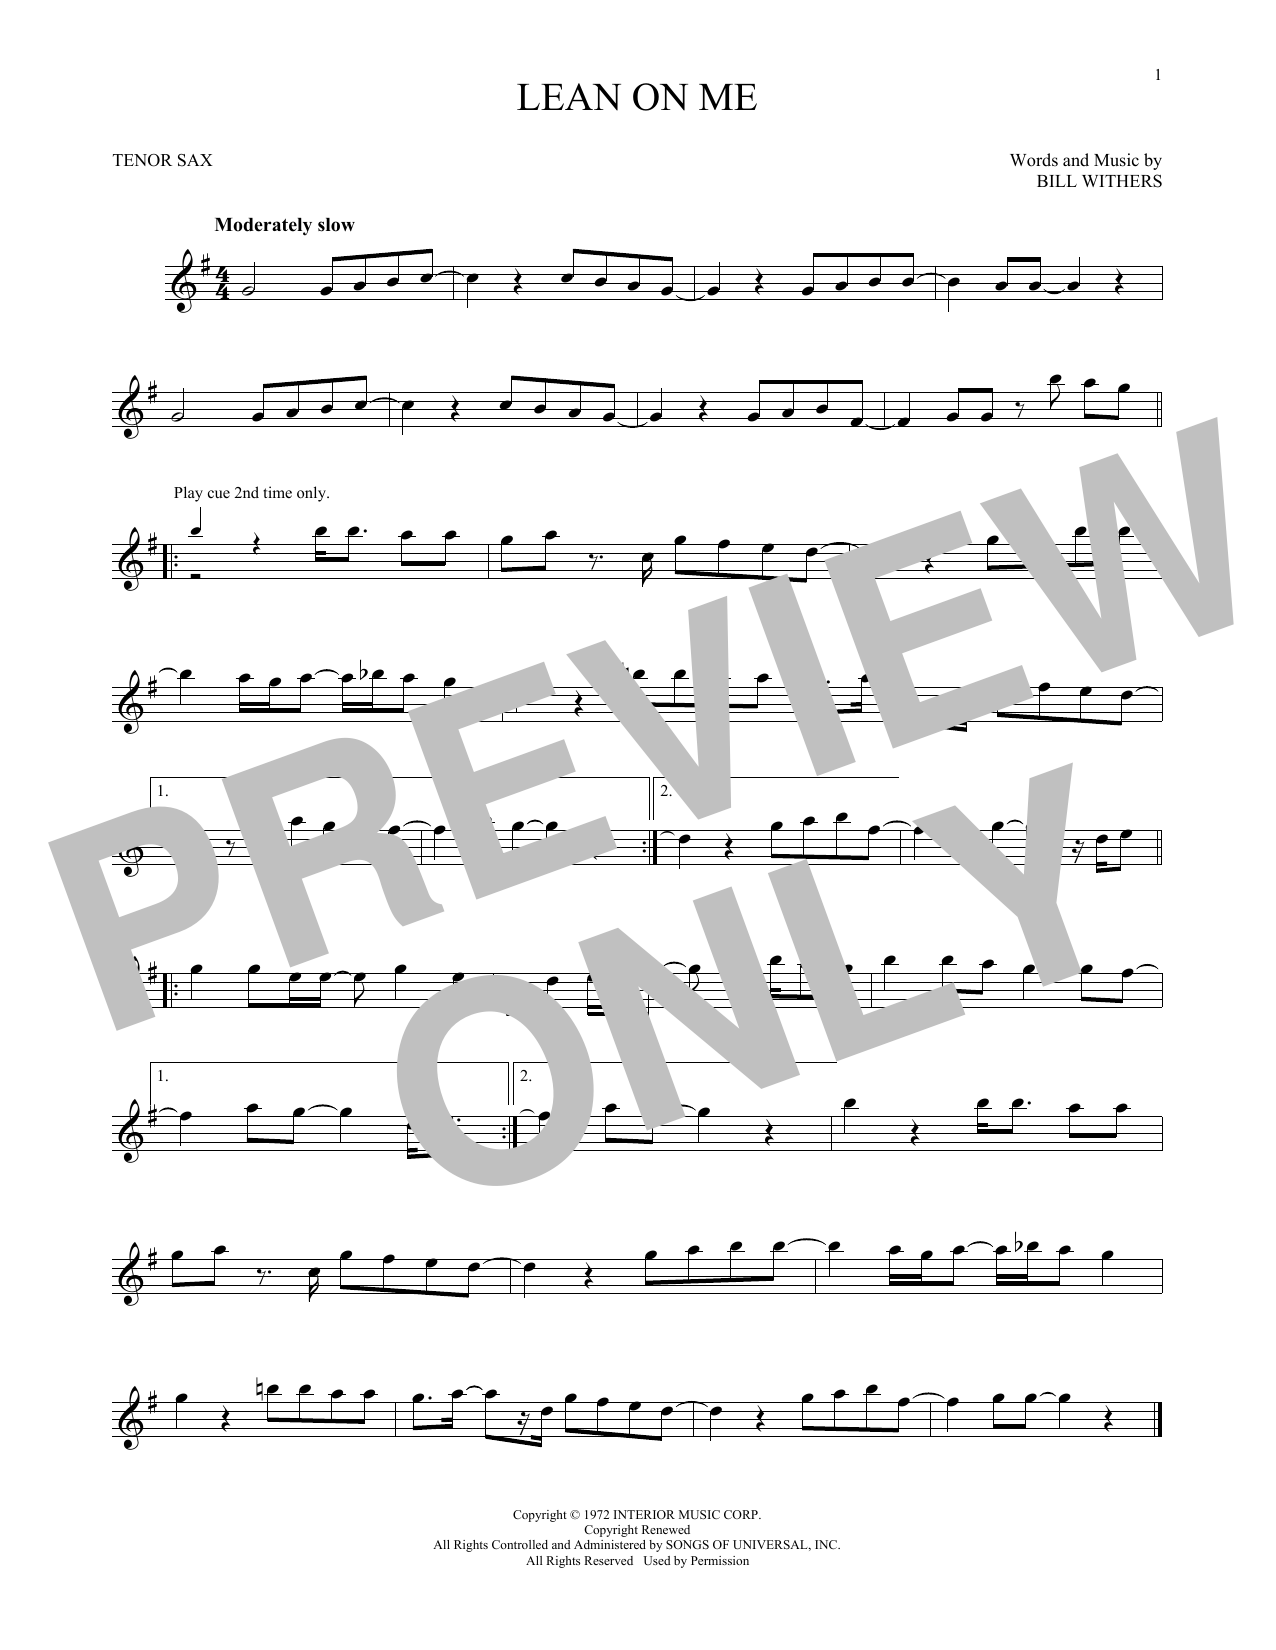 Download Bill Withers Lean On Me Sheet Music